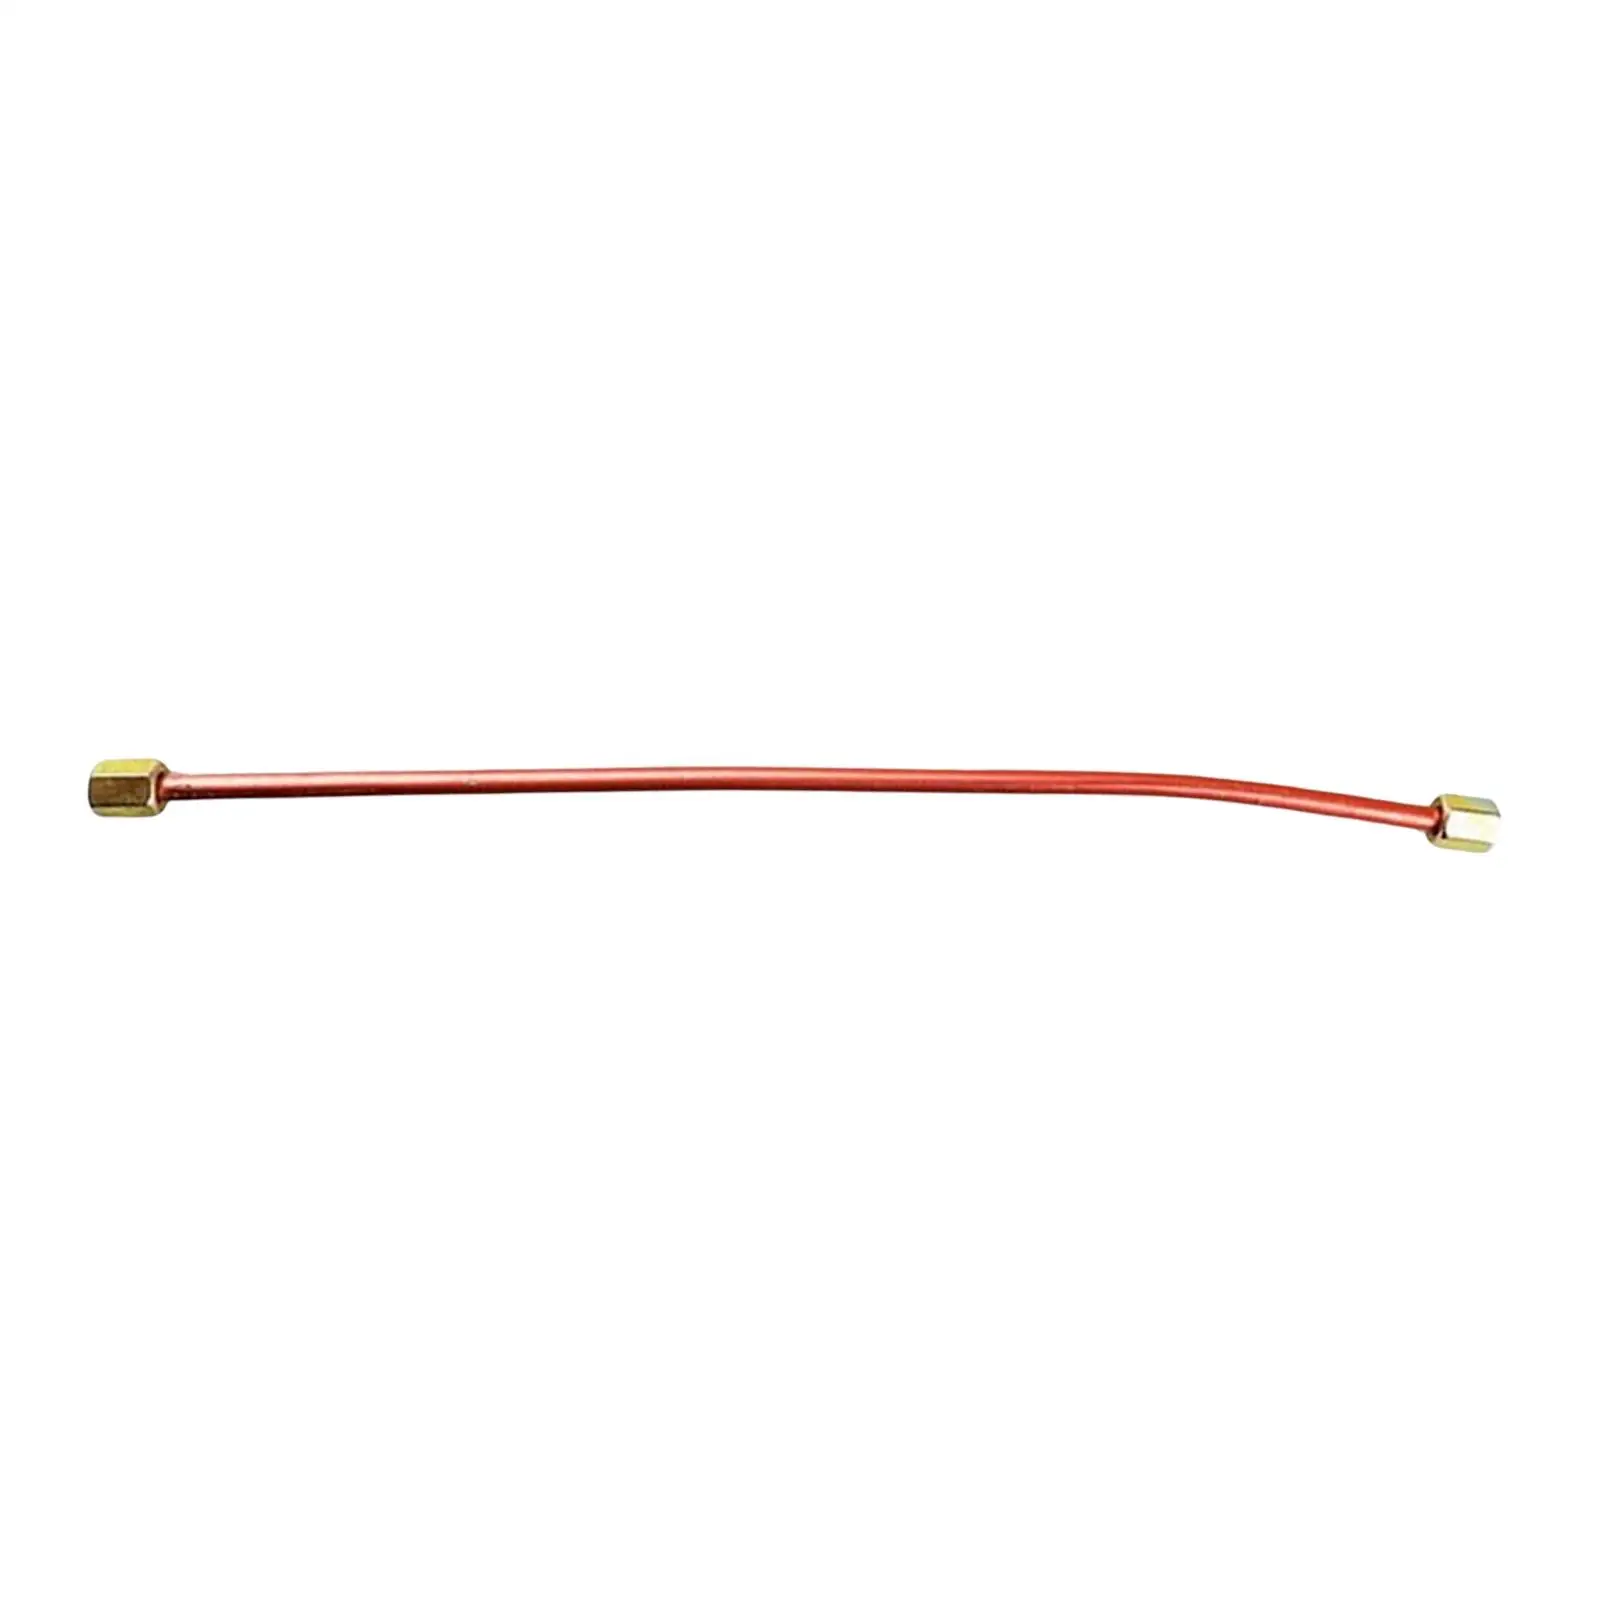 Air Compressor Exhaust Tube for Air Compressor Accessories Replacement